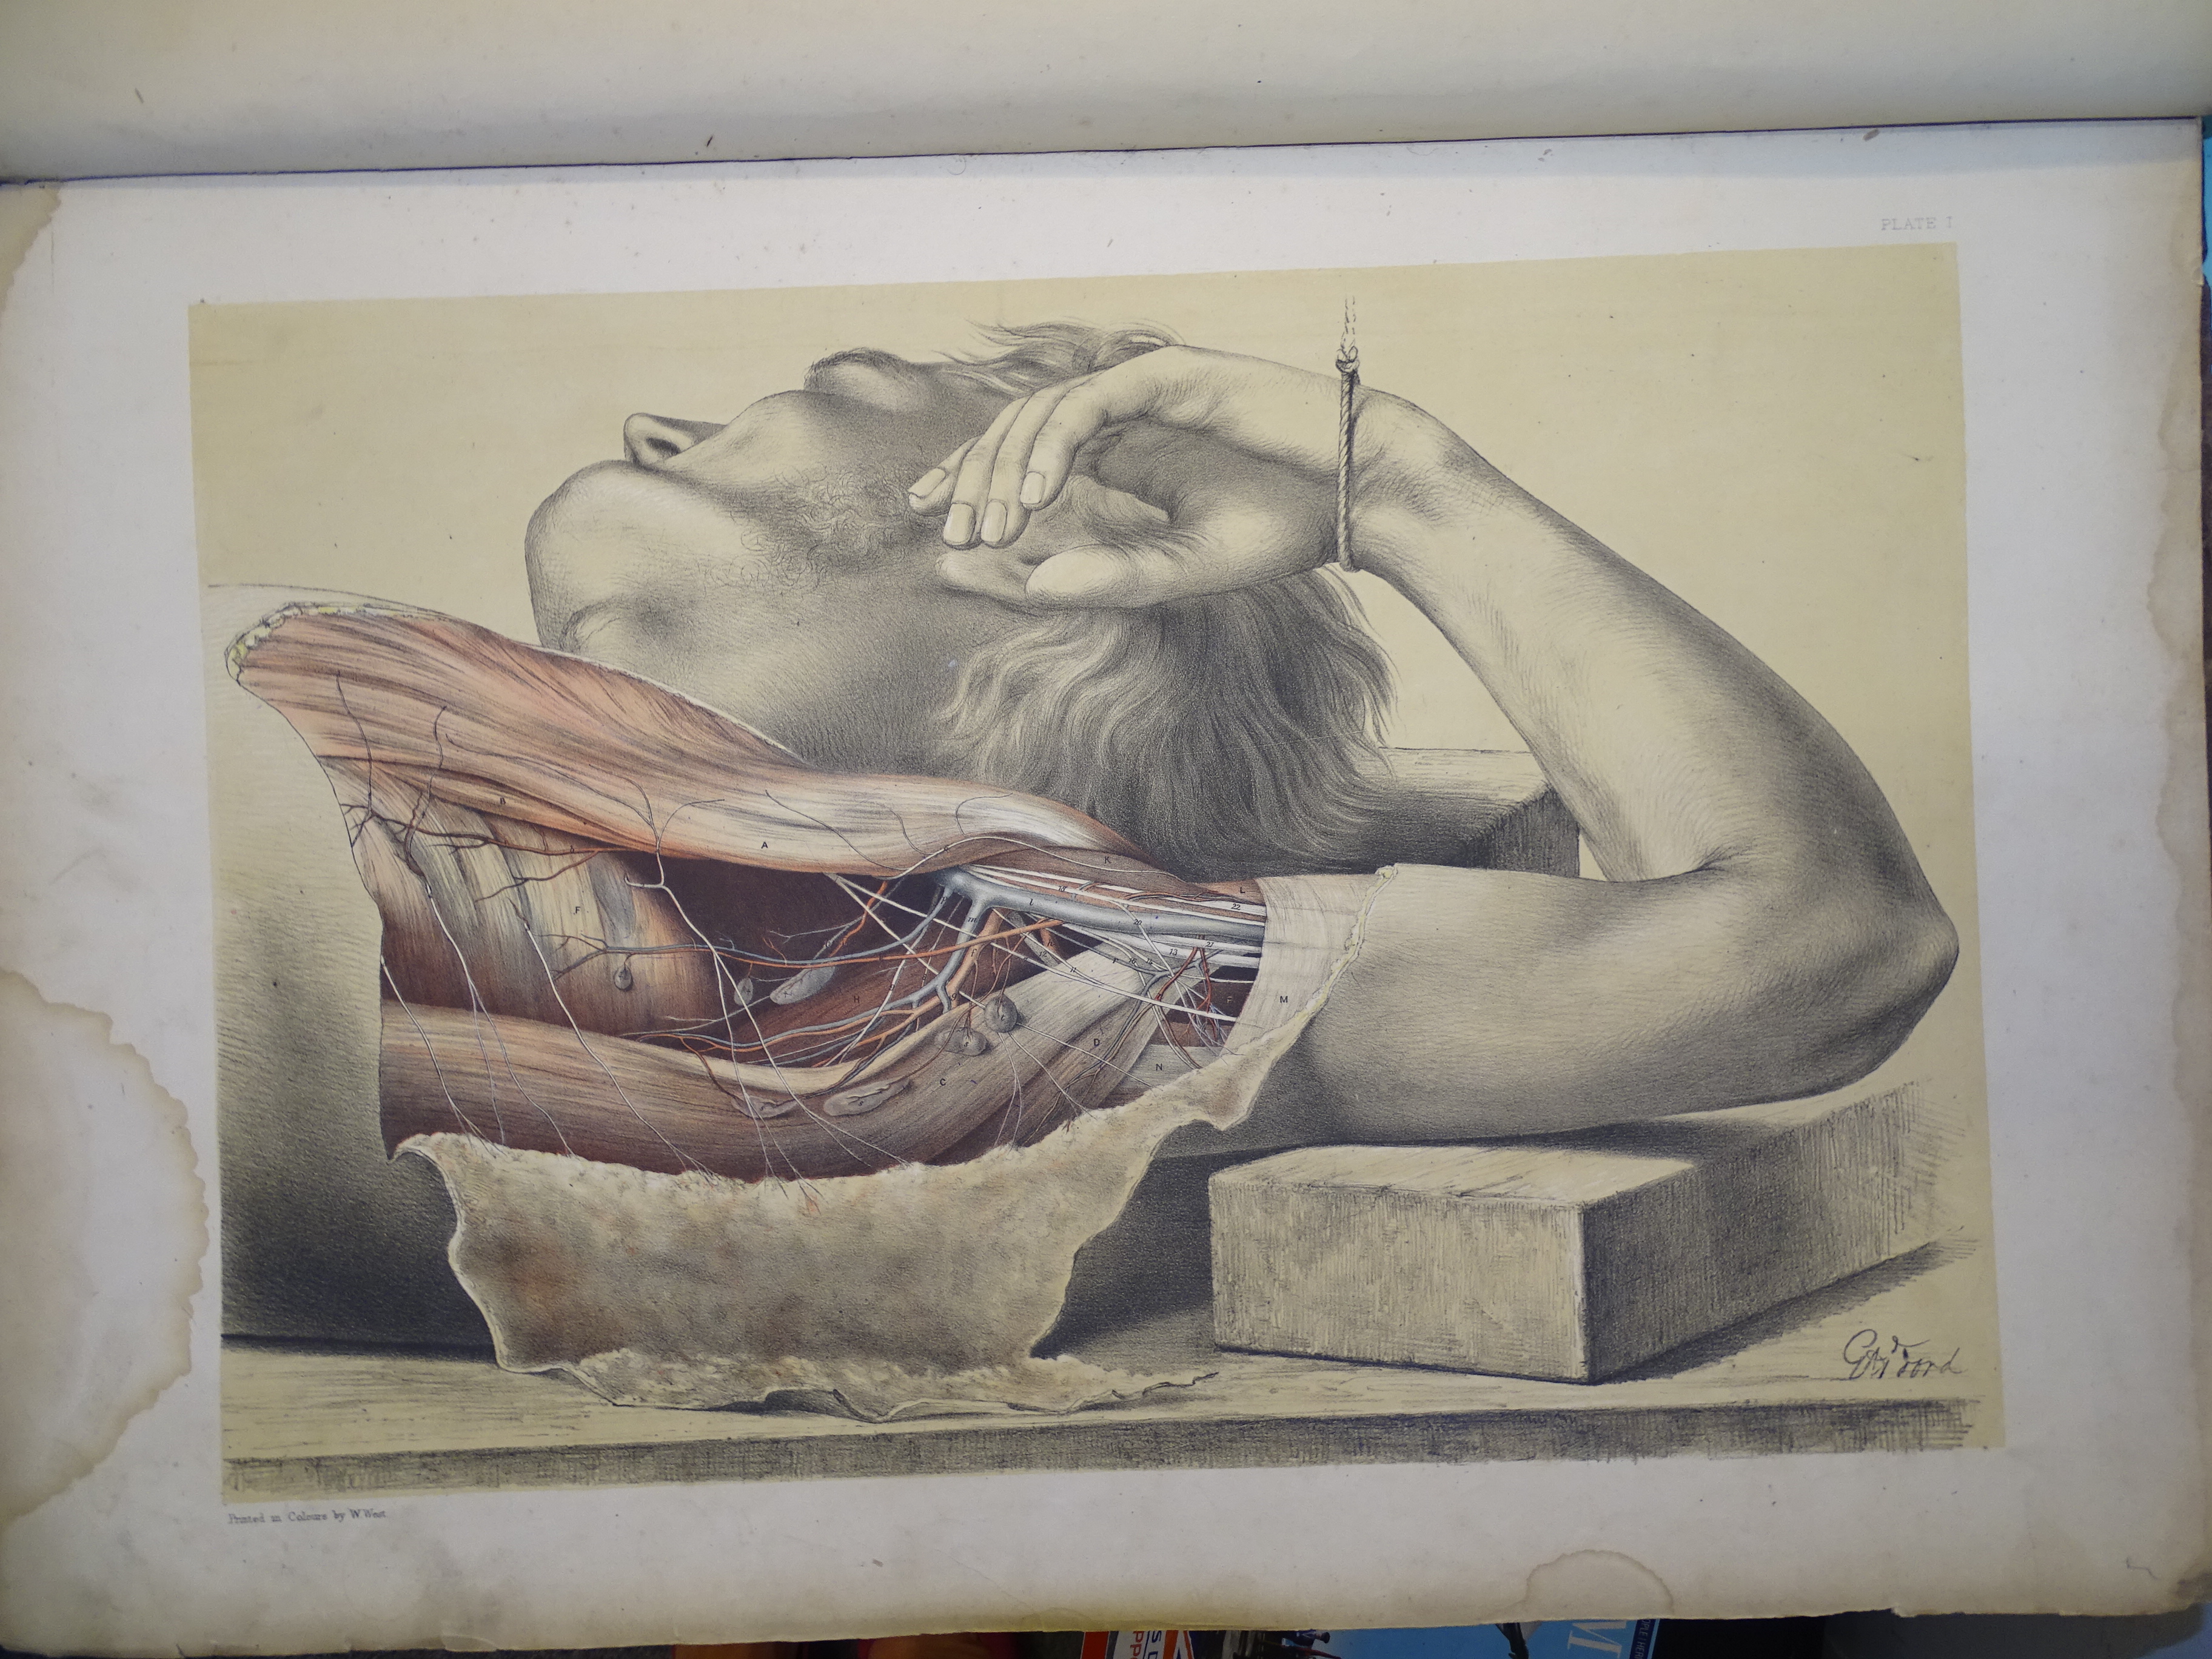 Ellis (George Viner) & Ford (G H), Illustrations of Dissections in a Series of Original Coloured - Image 5 of 9